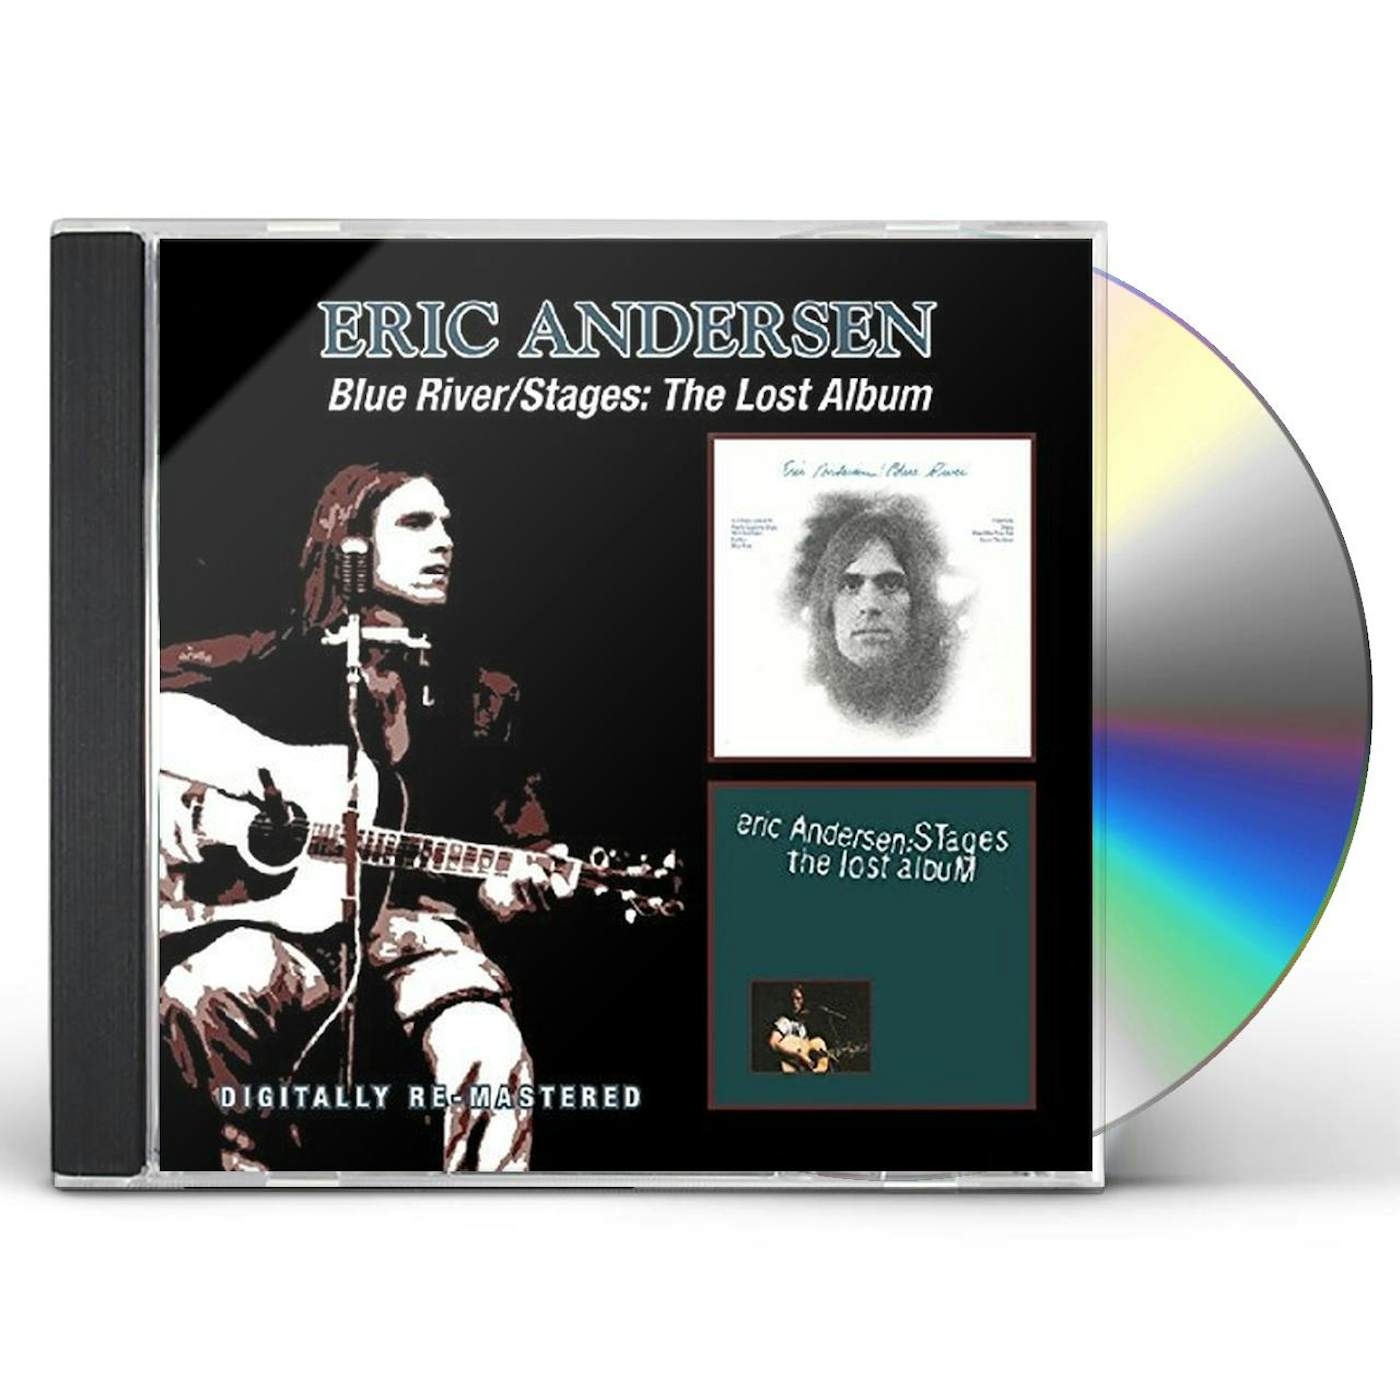 Eric Andersen BLUE RIVER/STAGES: LOST ALBUM CD